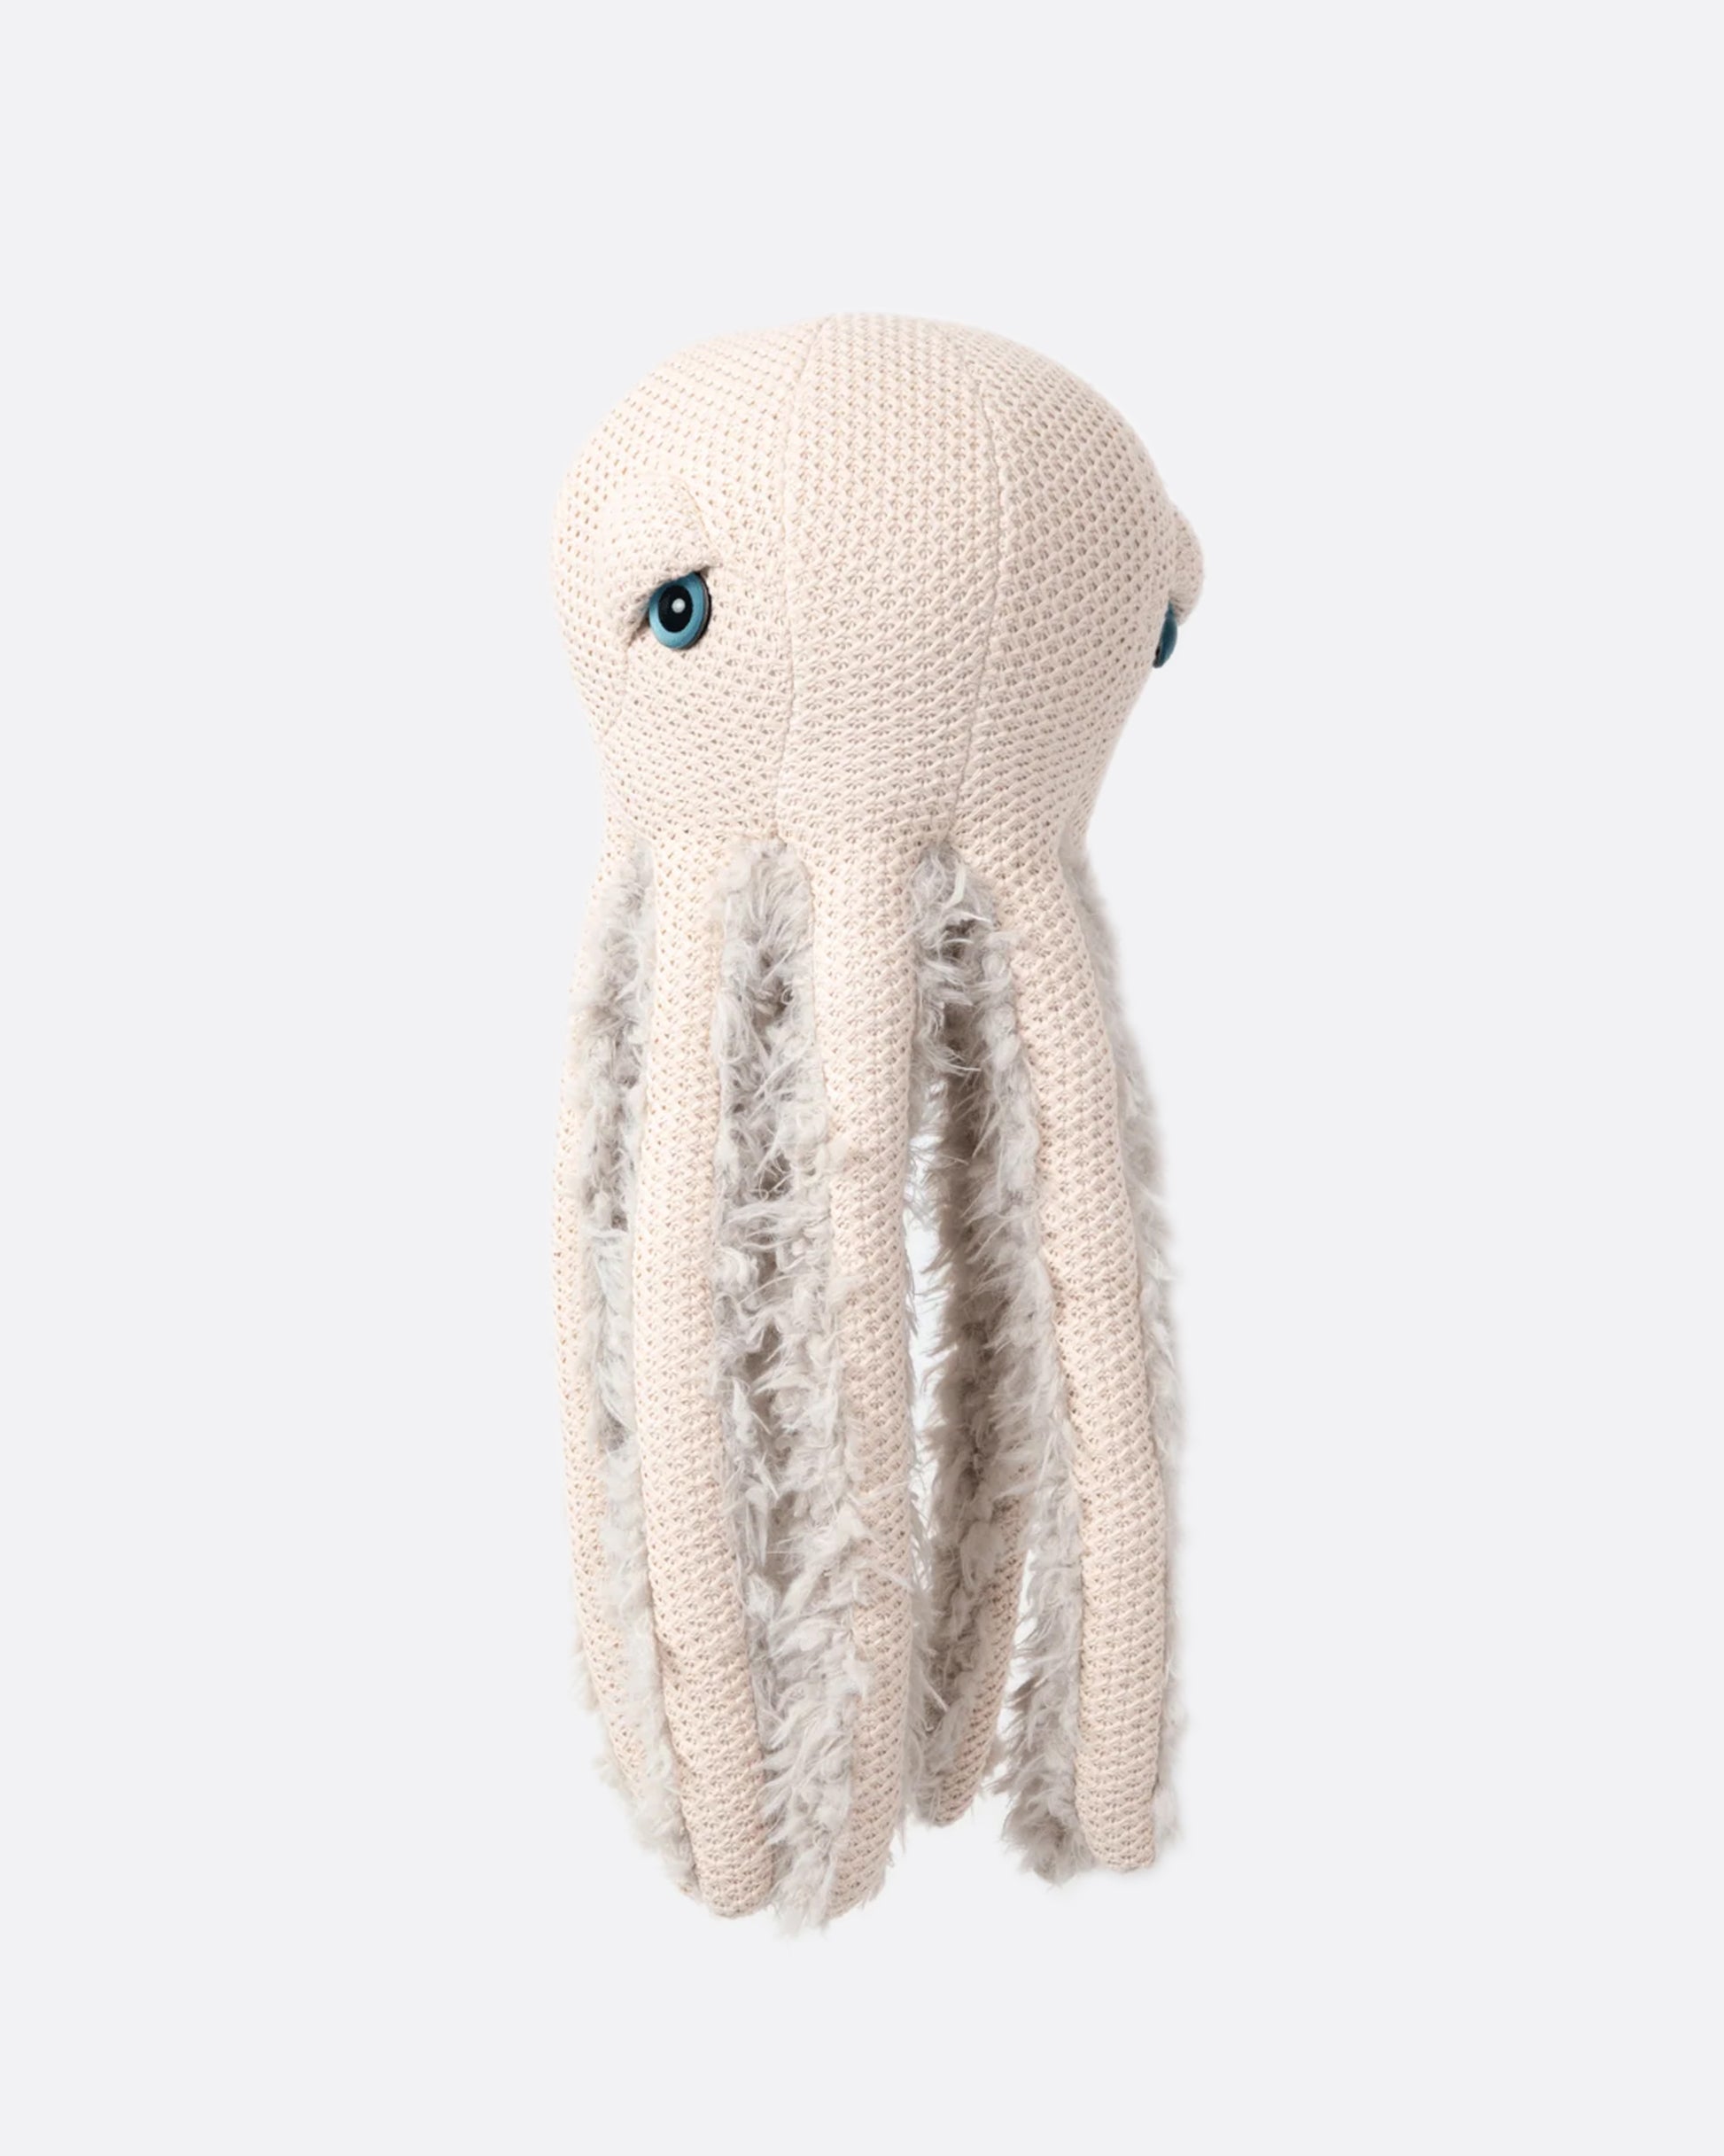 This pale pink octopus is made with strong stitching and premium fabrics; it was born to last and stay by your side.